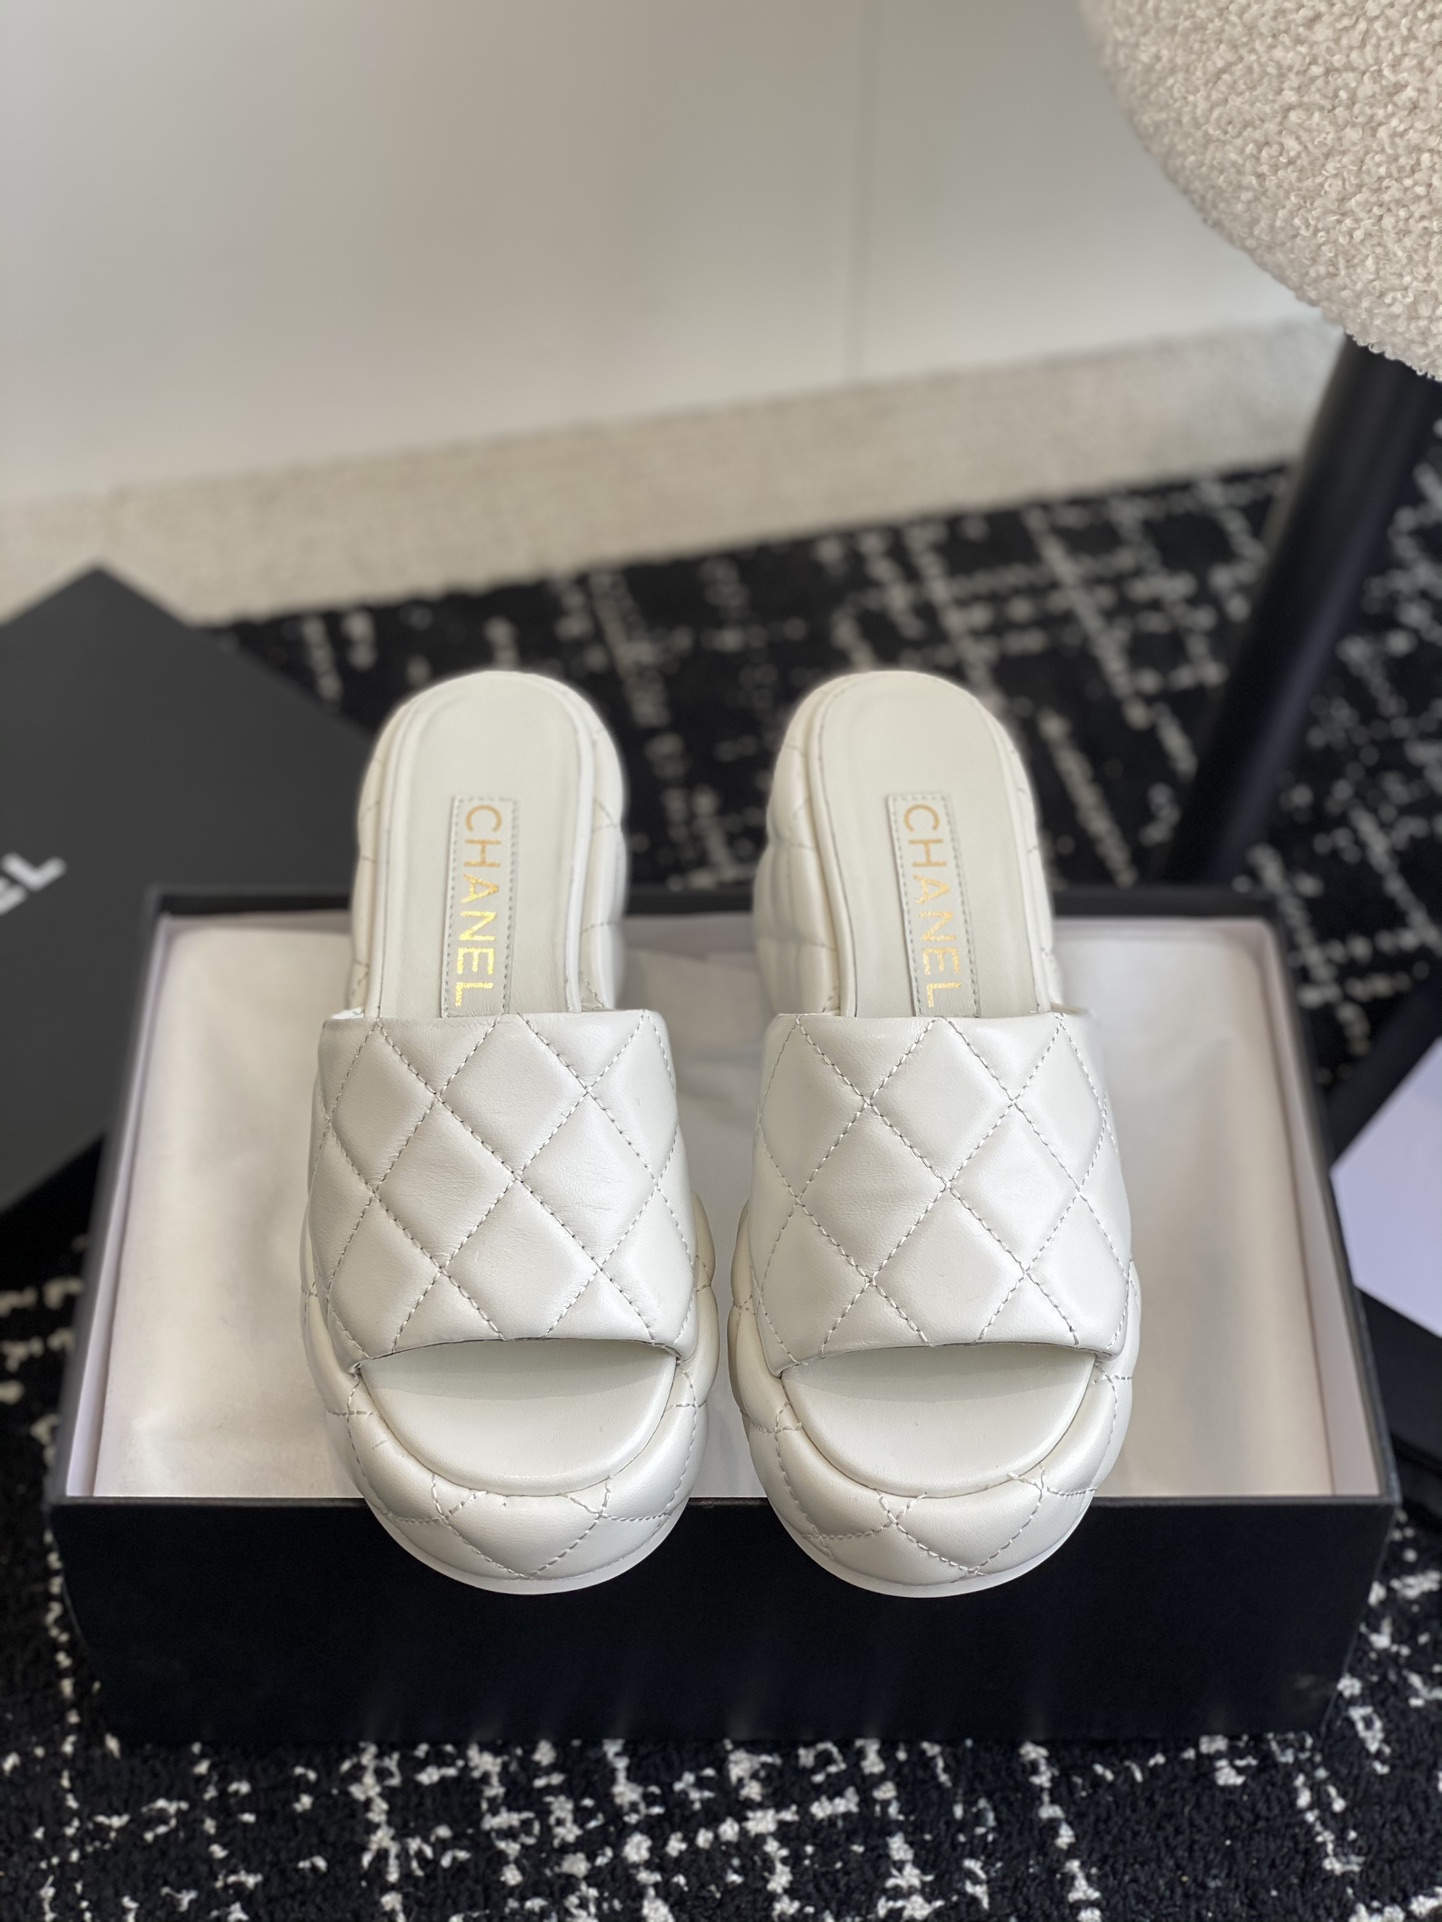 Chanel Shoes Slippers Knockoff Highest Quality
 Lambskin Sheepskin